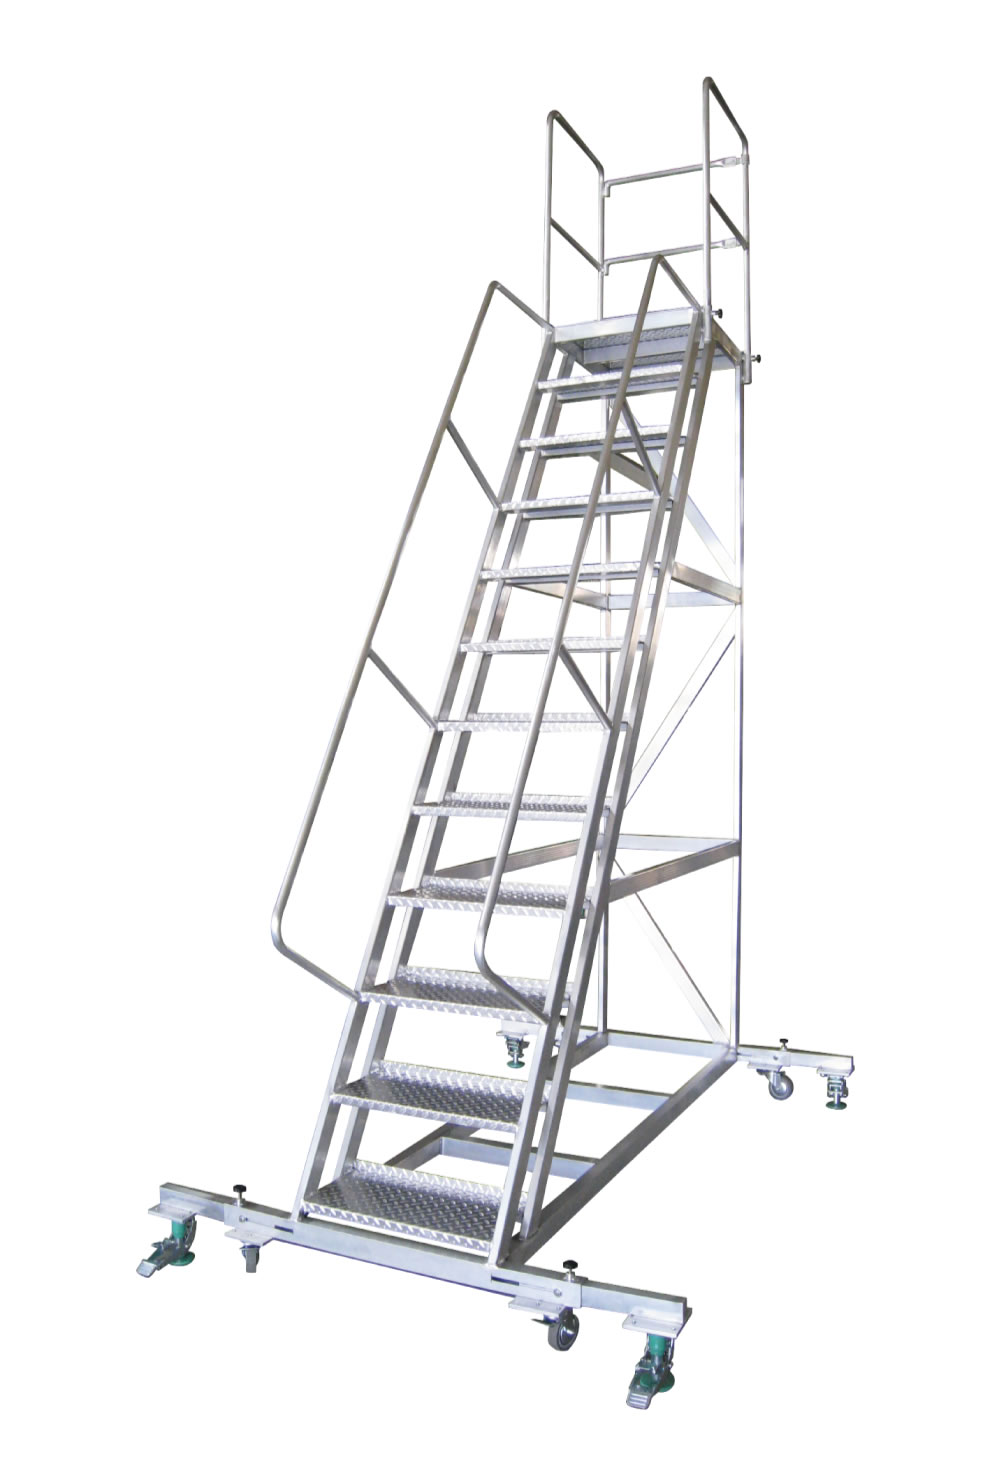 AFU Mobile Platform Ladder-CHIAO TENG HSIN ENTERPRISE CO., LTD.-Specialized  ladders tool,Aluminum ladder,Folding Ladder,Stepladder,Straight  Ladder,Extension Ladder,Household Stepladder,gardening ladder,Special  Ladder and Related spare parts